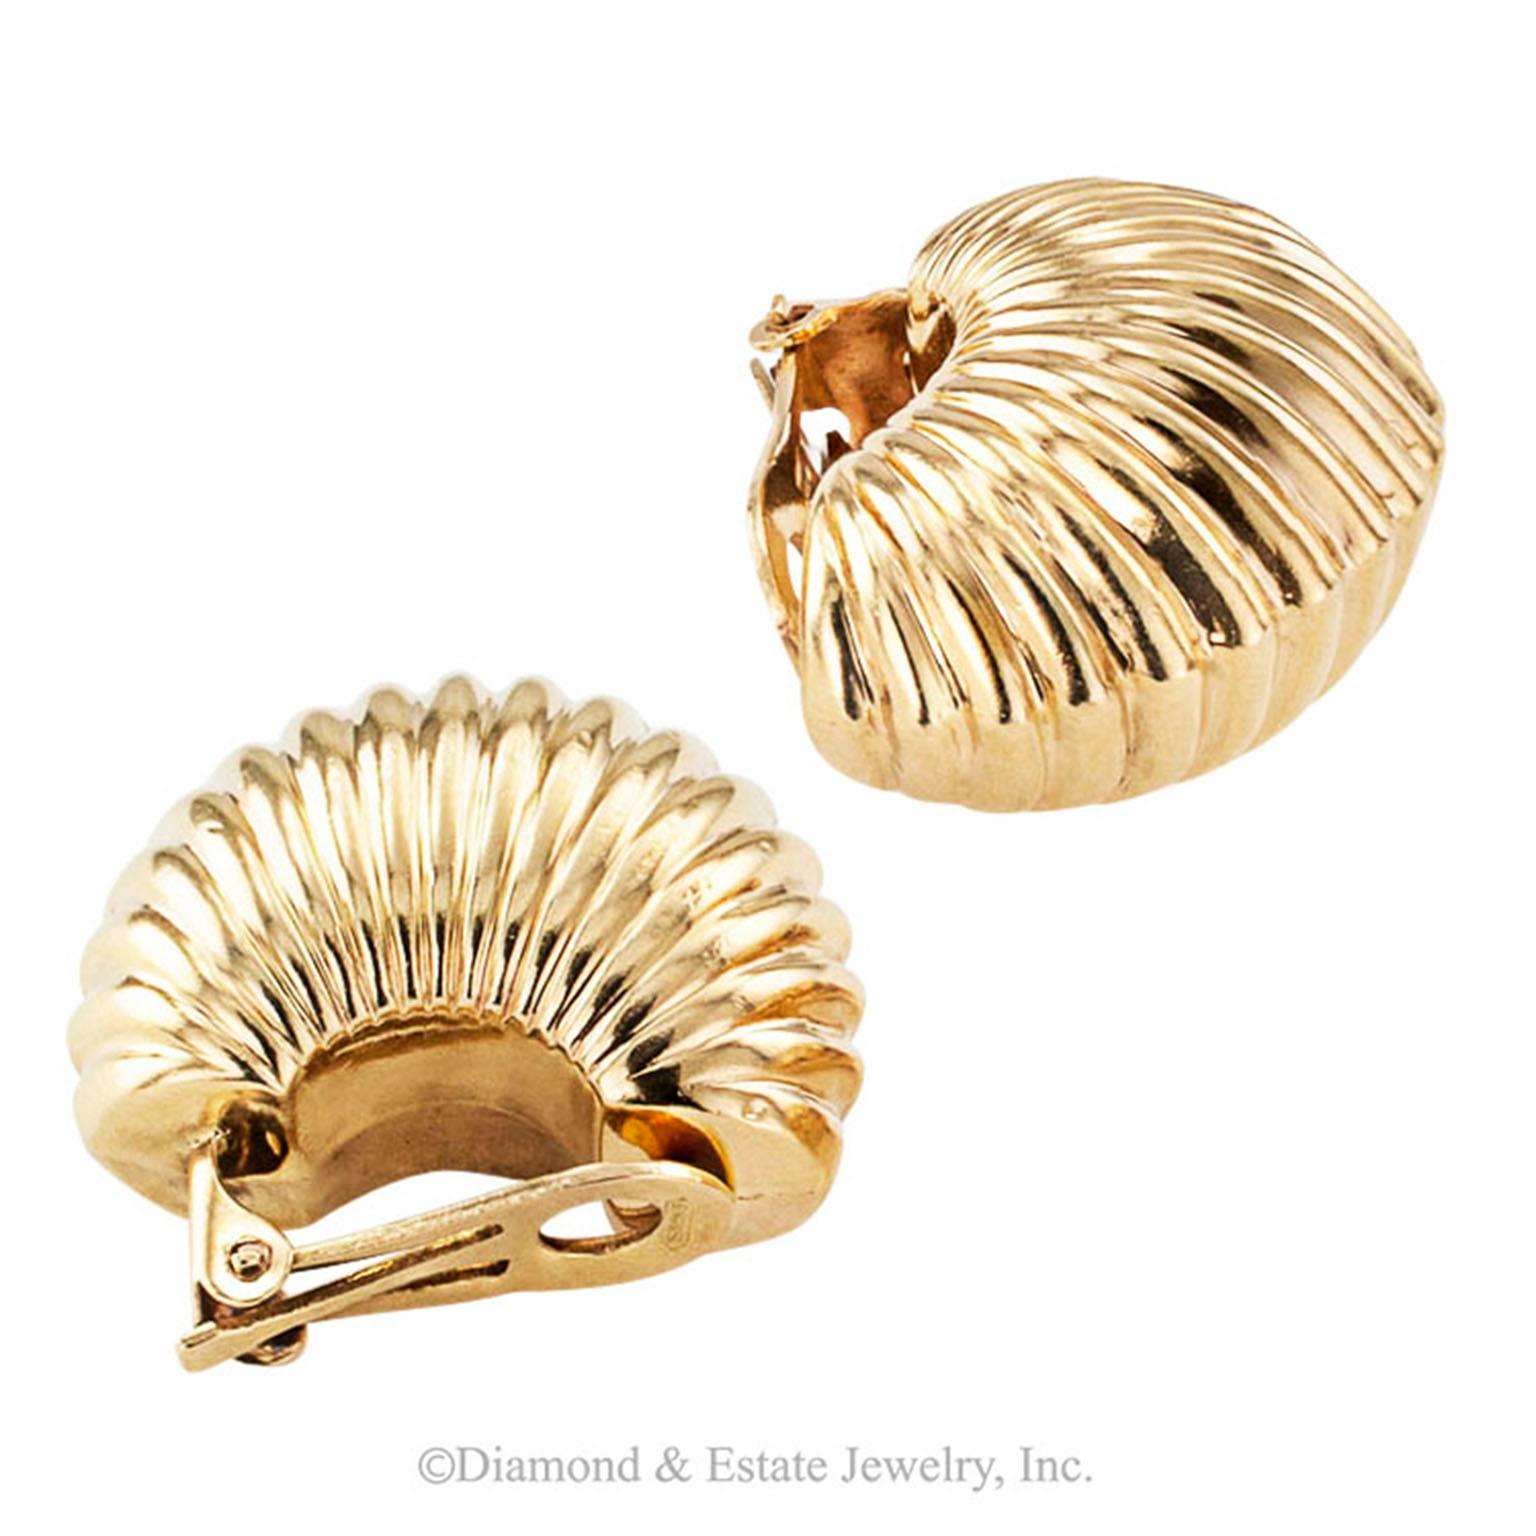 1960s Larger Shrimp-style Gold Hoop Ear Clips

Voluminous, puffy, shrimp-style clip-on 14 karat gold hoop earrings with  a horizontal ribbed motif that sets them apart.  Different, interesting, like the woman who wears them.  Thanks to ingenious